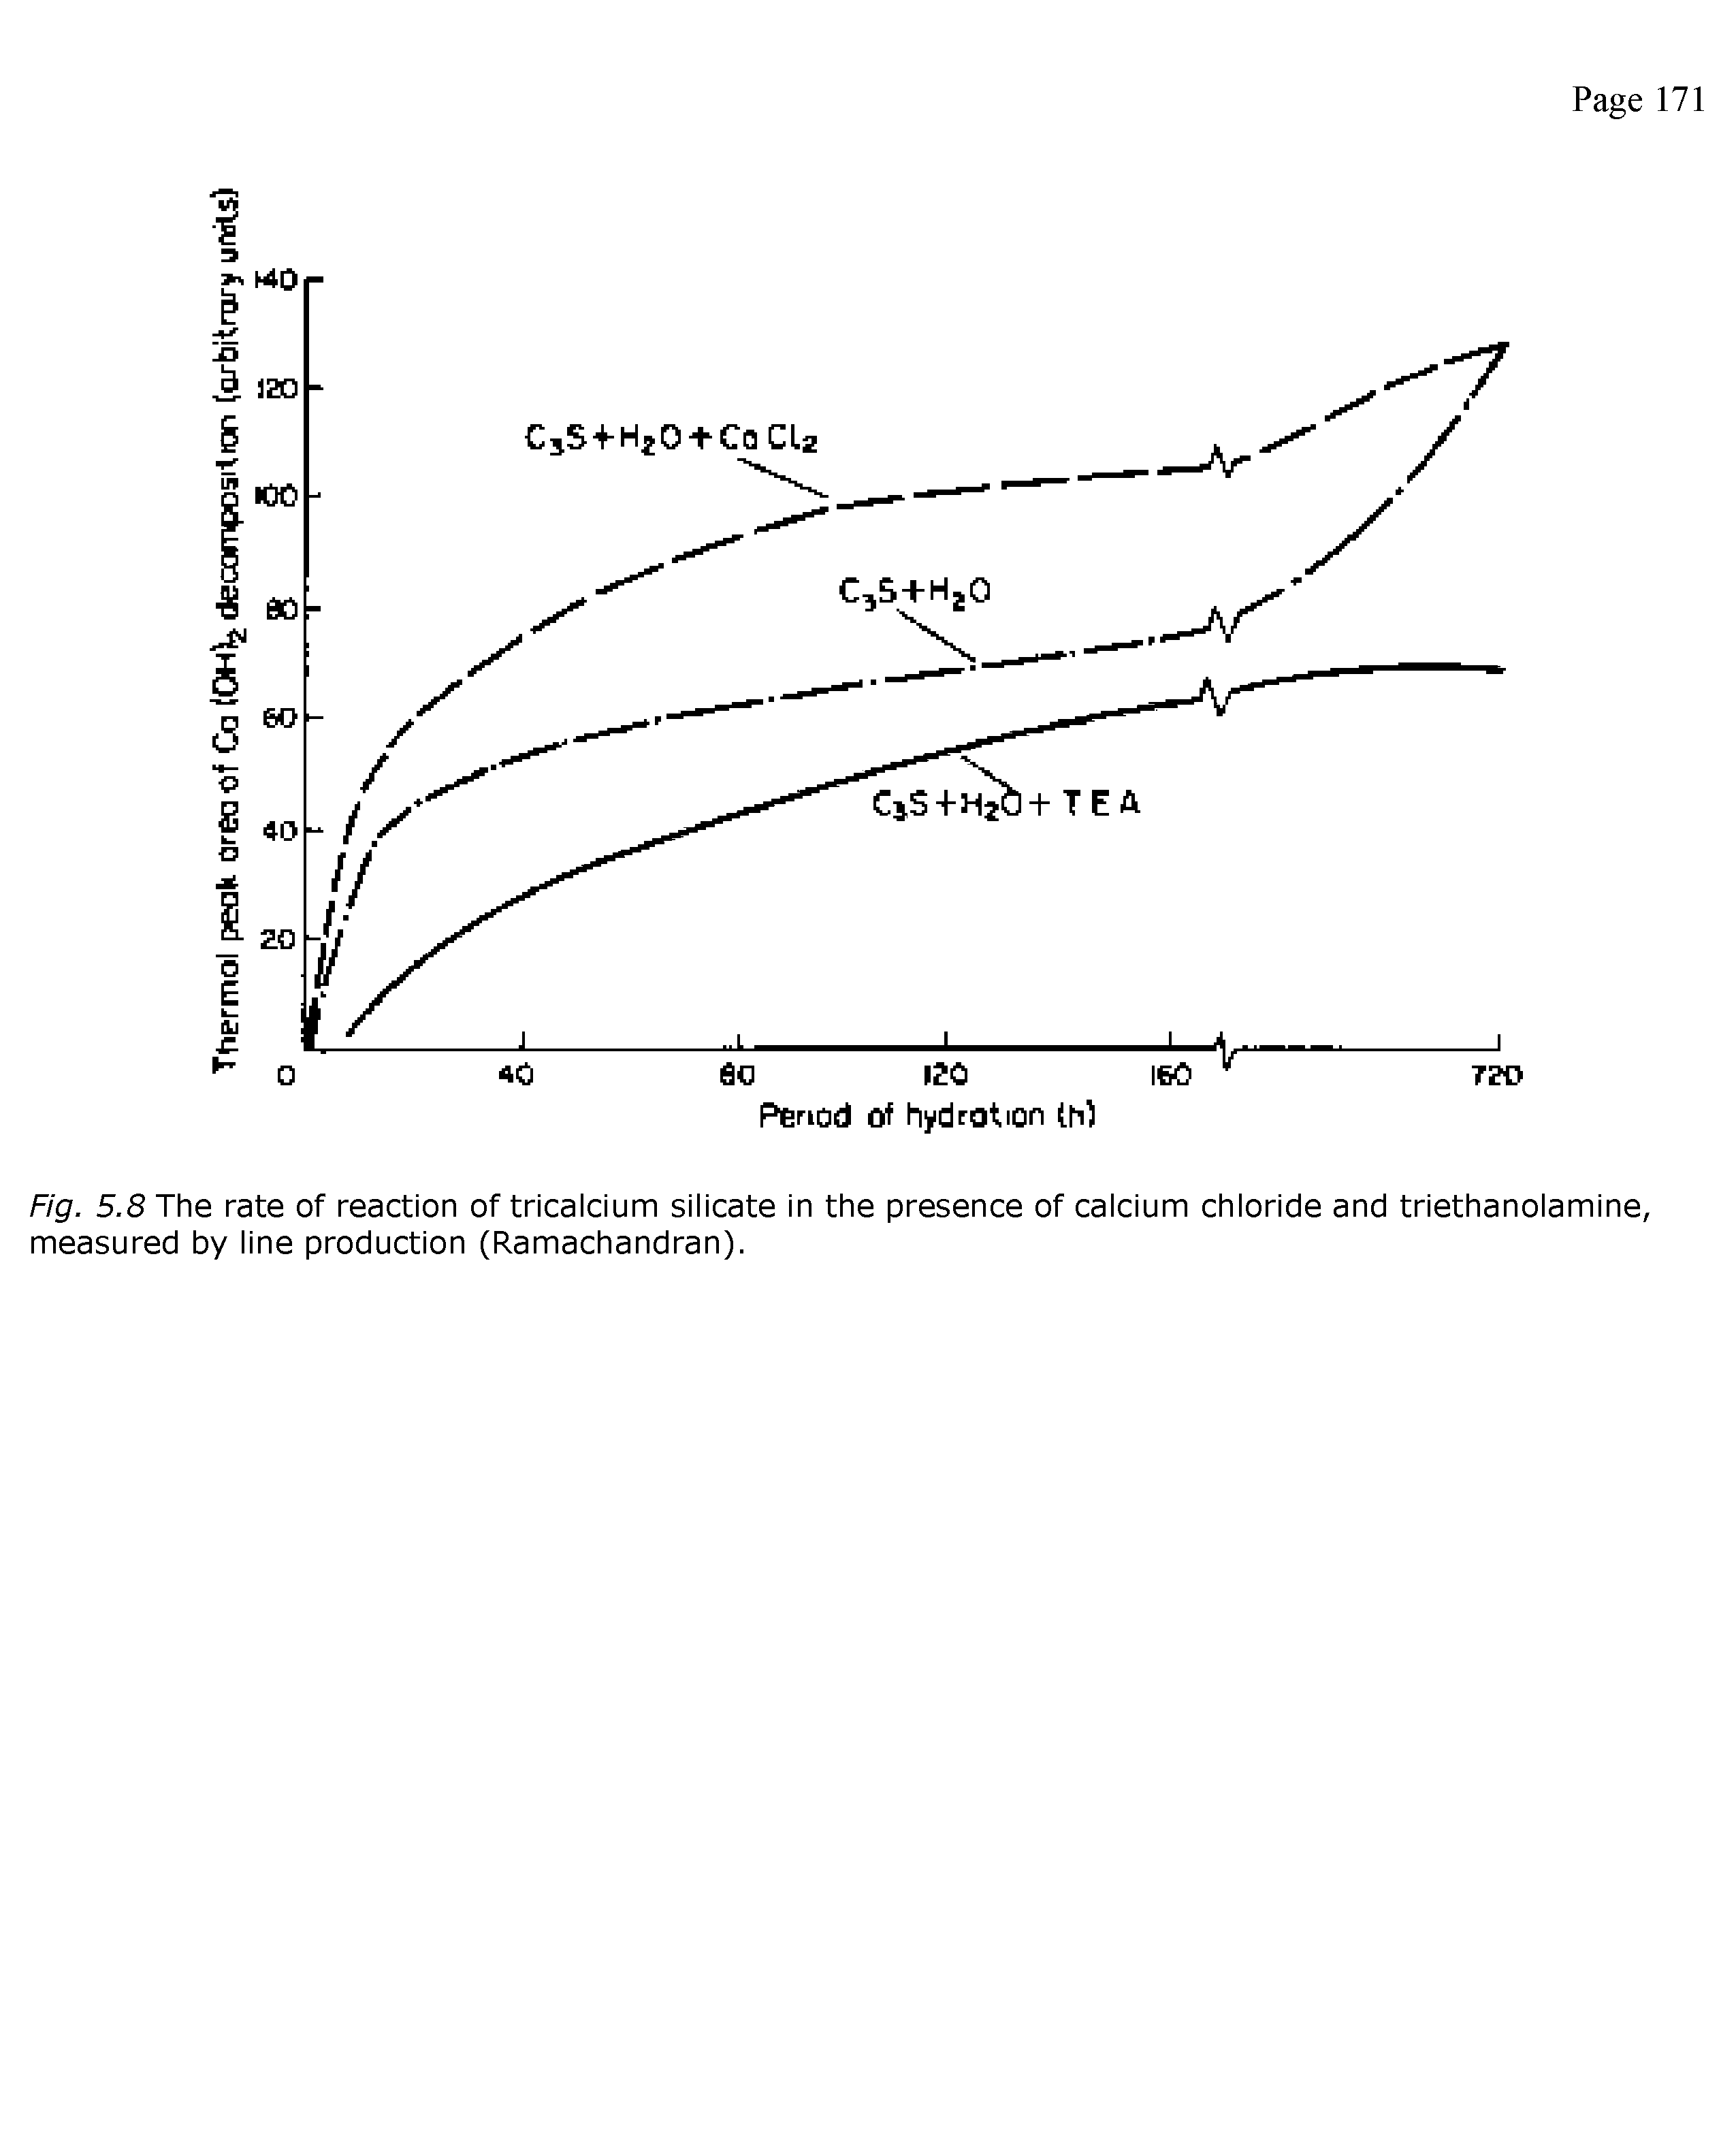 Fig. 5.8 The rate of reaction of tricalcium silicate in the presence of calcium chloride and triethanolamine, measured by line production (Ramachandran).